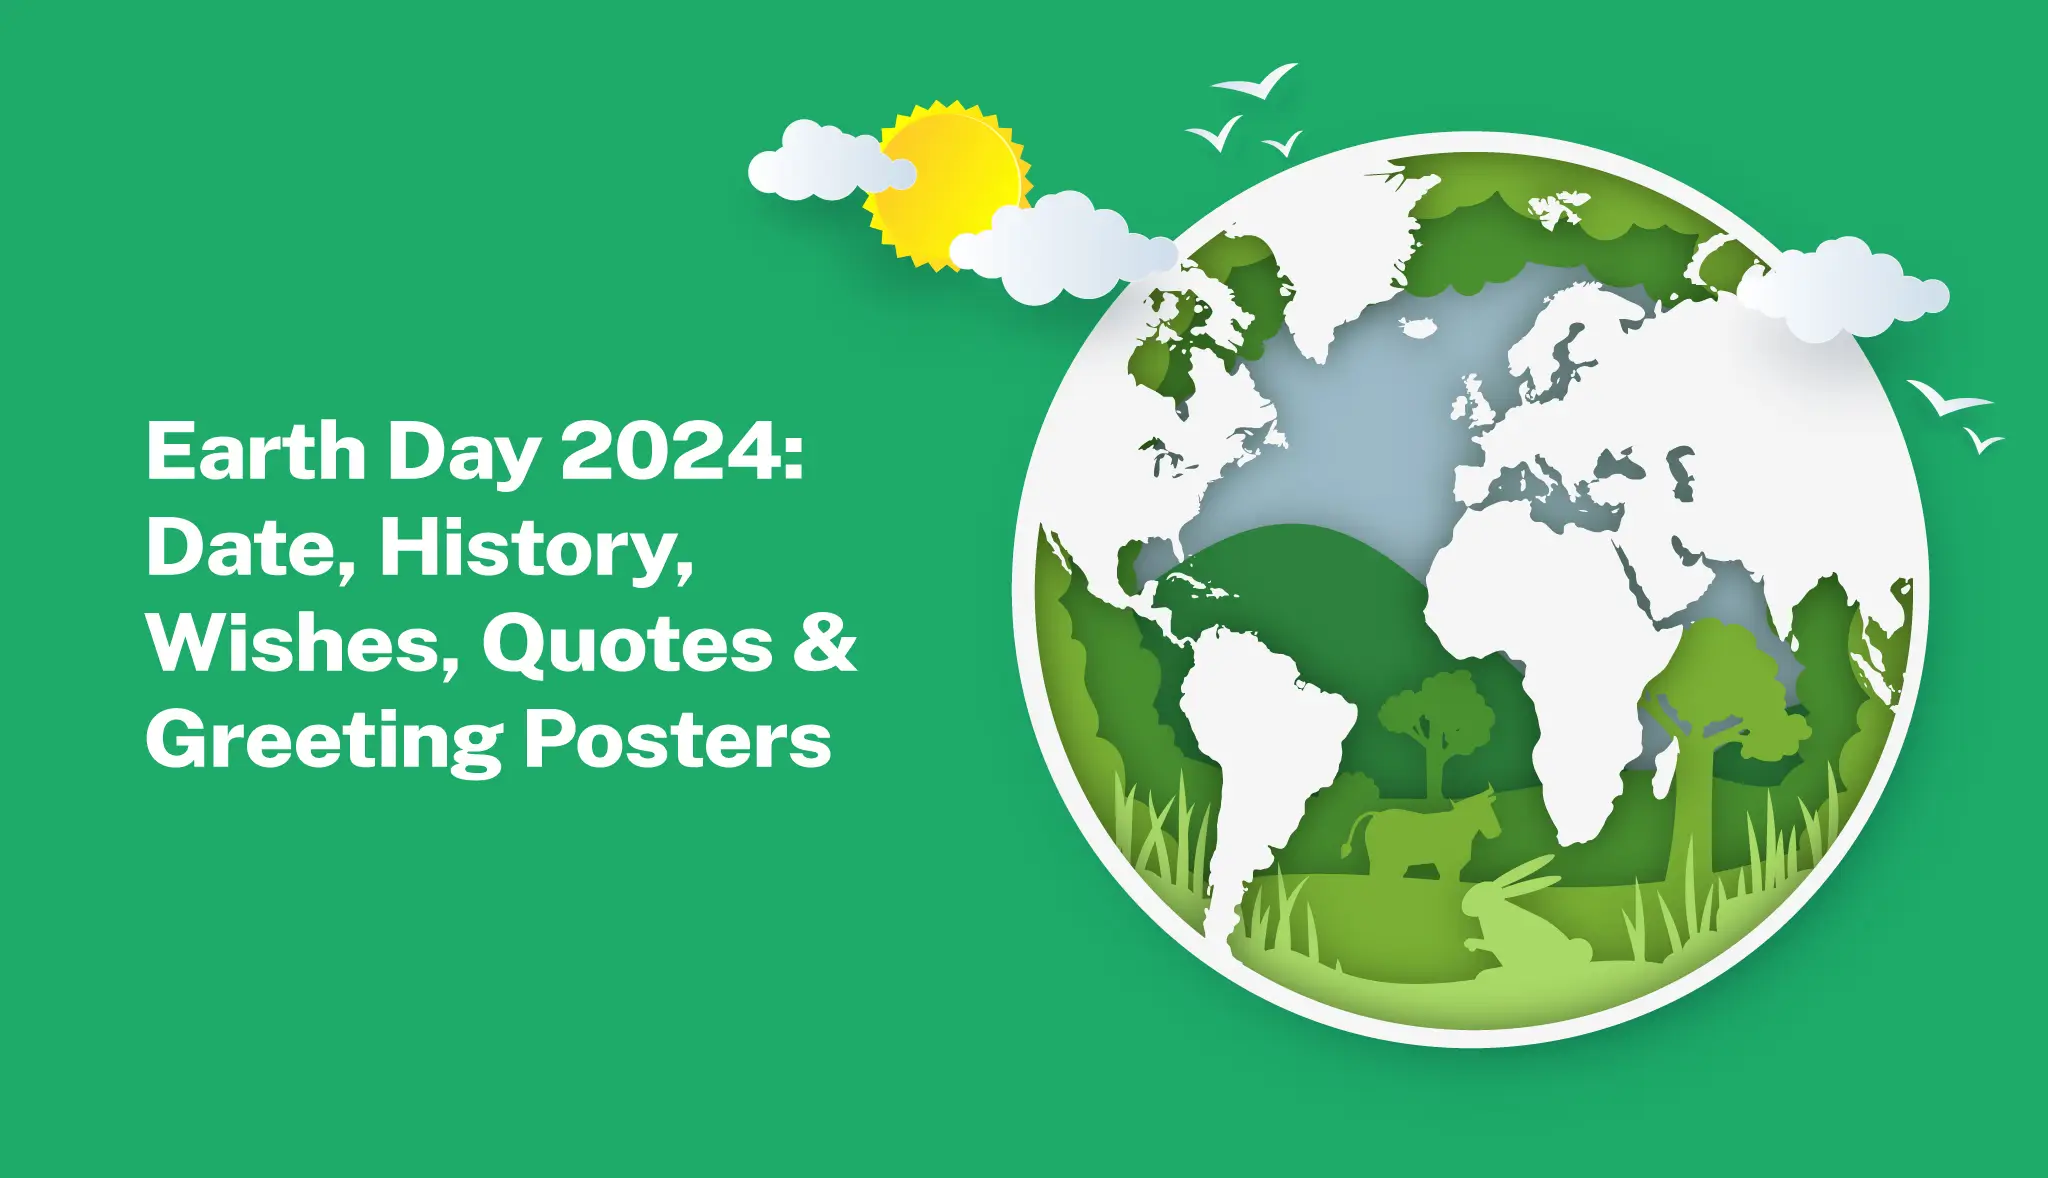 Earth Day 2024: Date, History, Wishes, Quotes & Posters - Postive